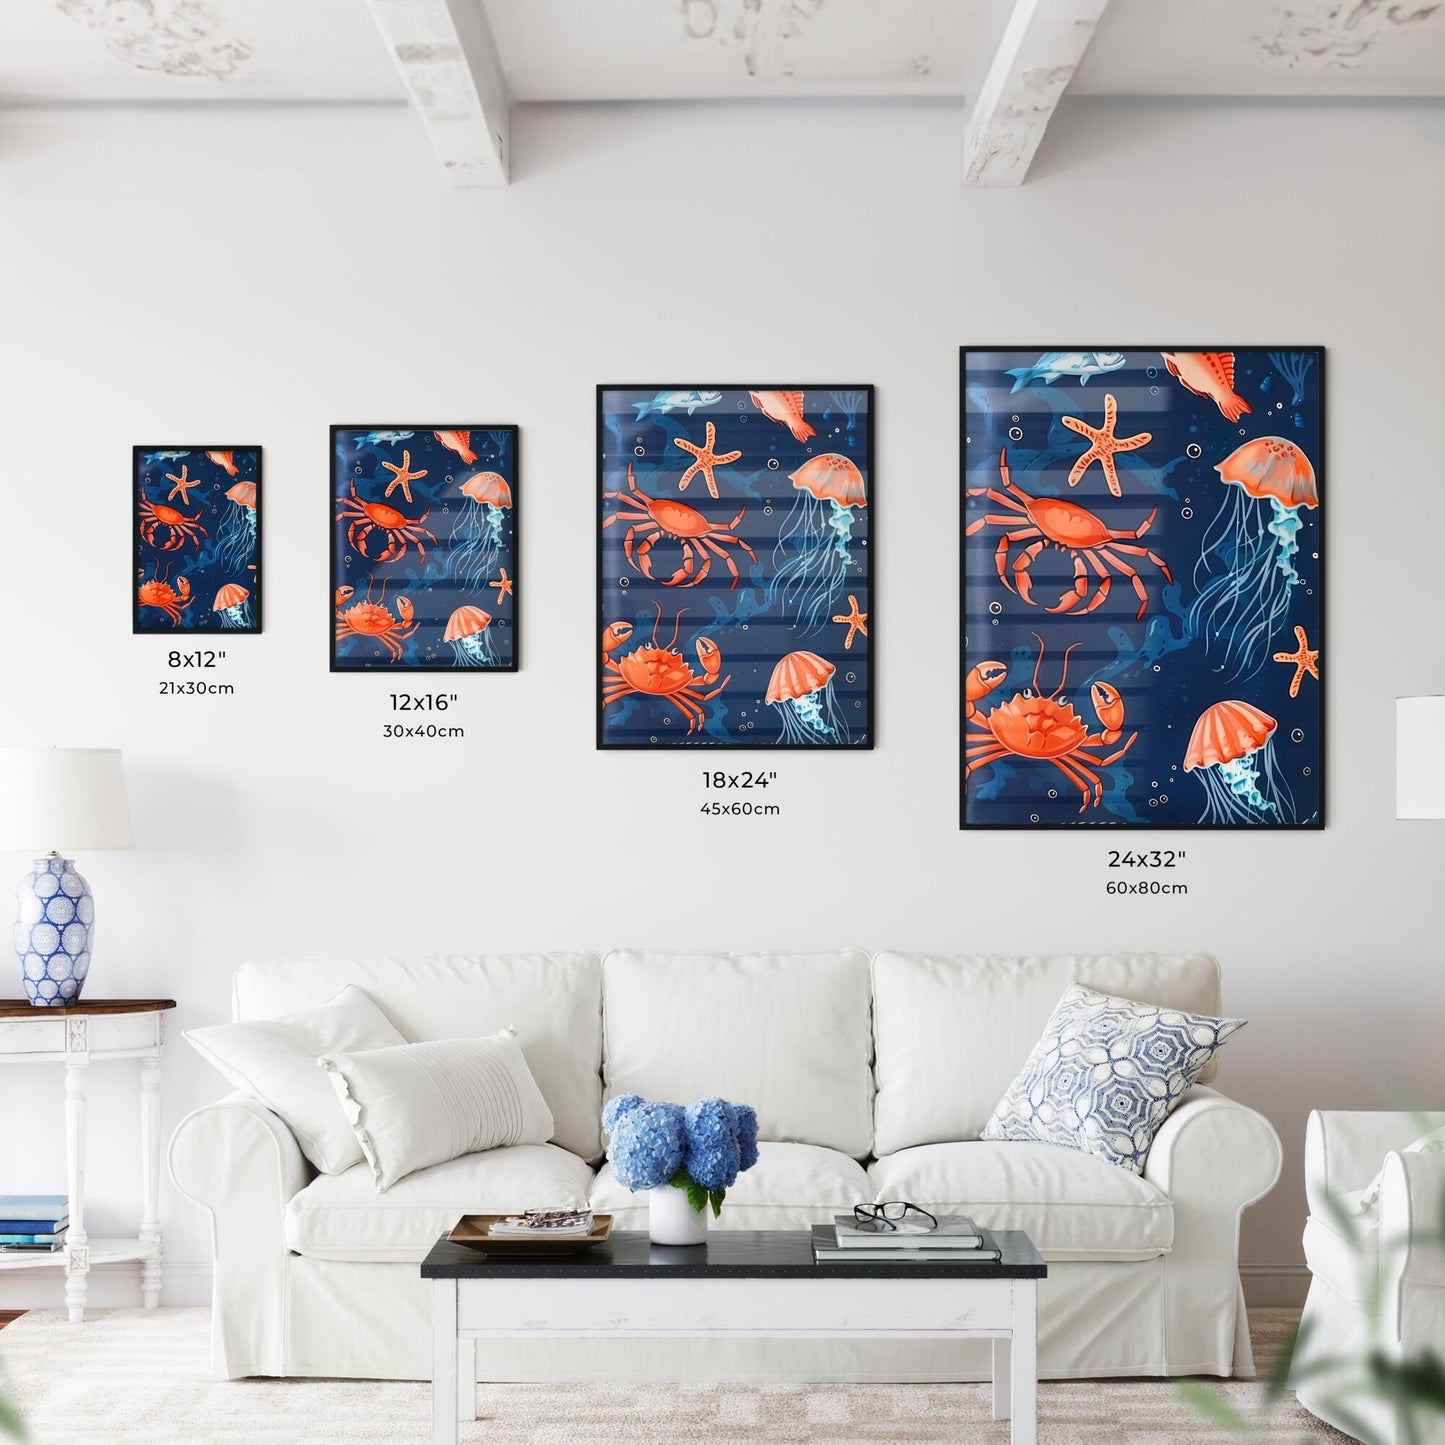 Vibrant Marine Canvas: Blue Ocean Hues Adorned with Playful Fish, Jellyfish, and Crabs Default Title